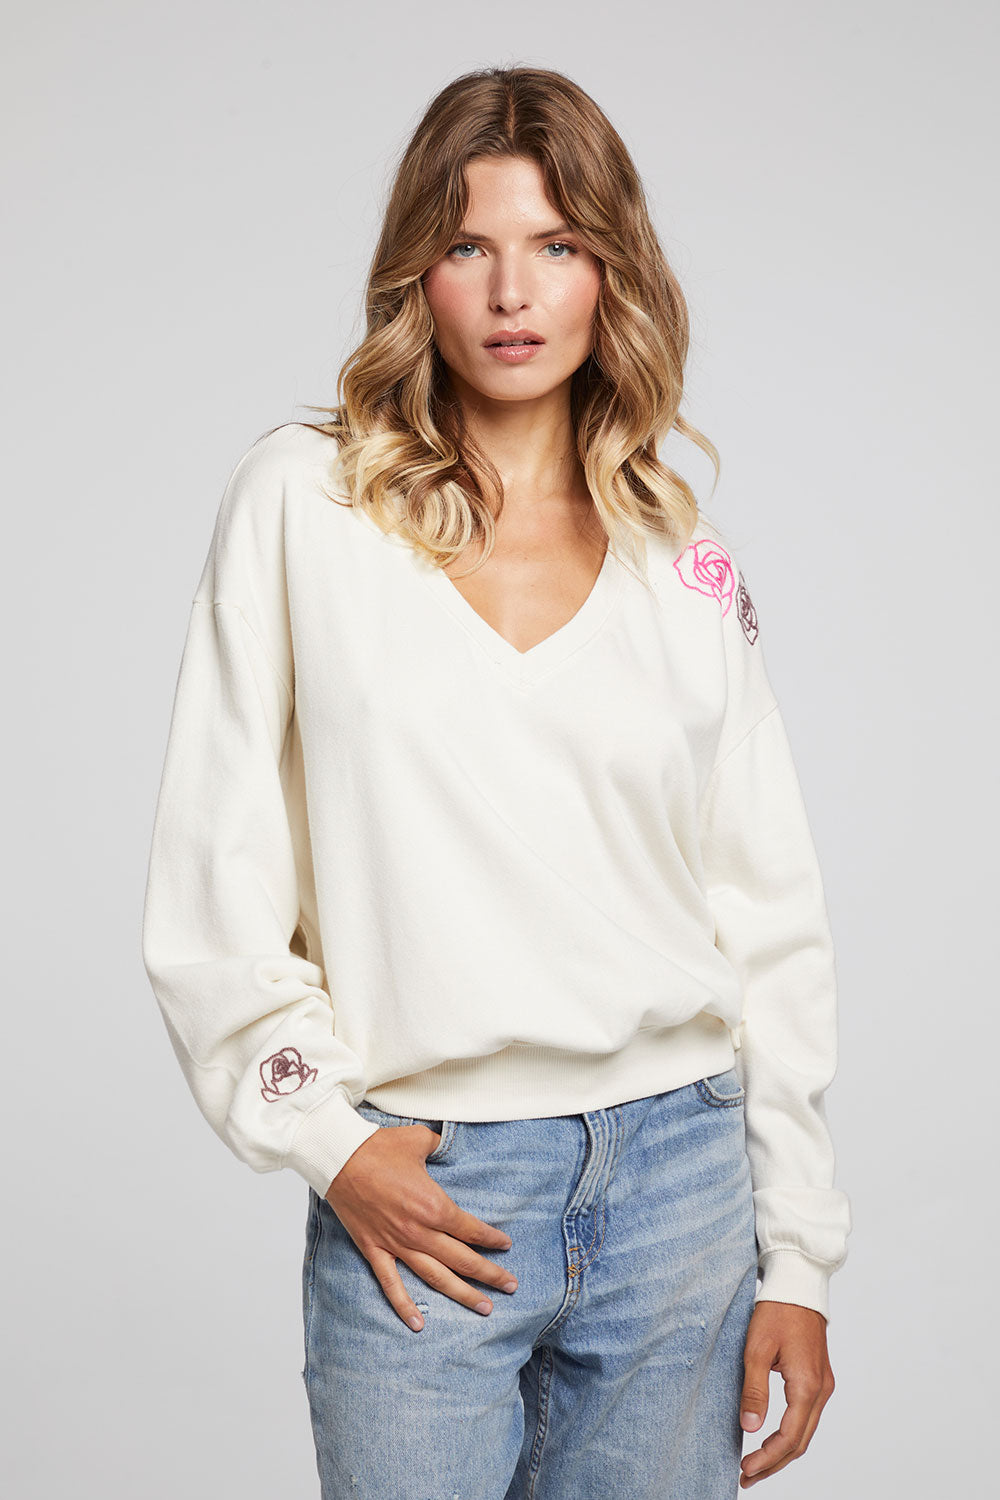 Embroidery Roses Pullover WOMENS chaserbrand